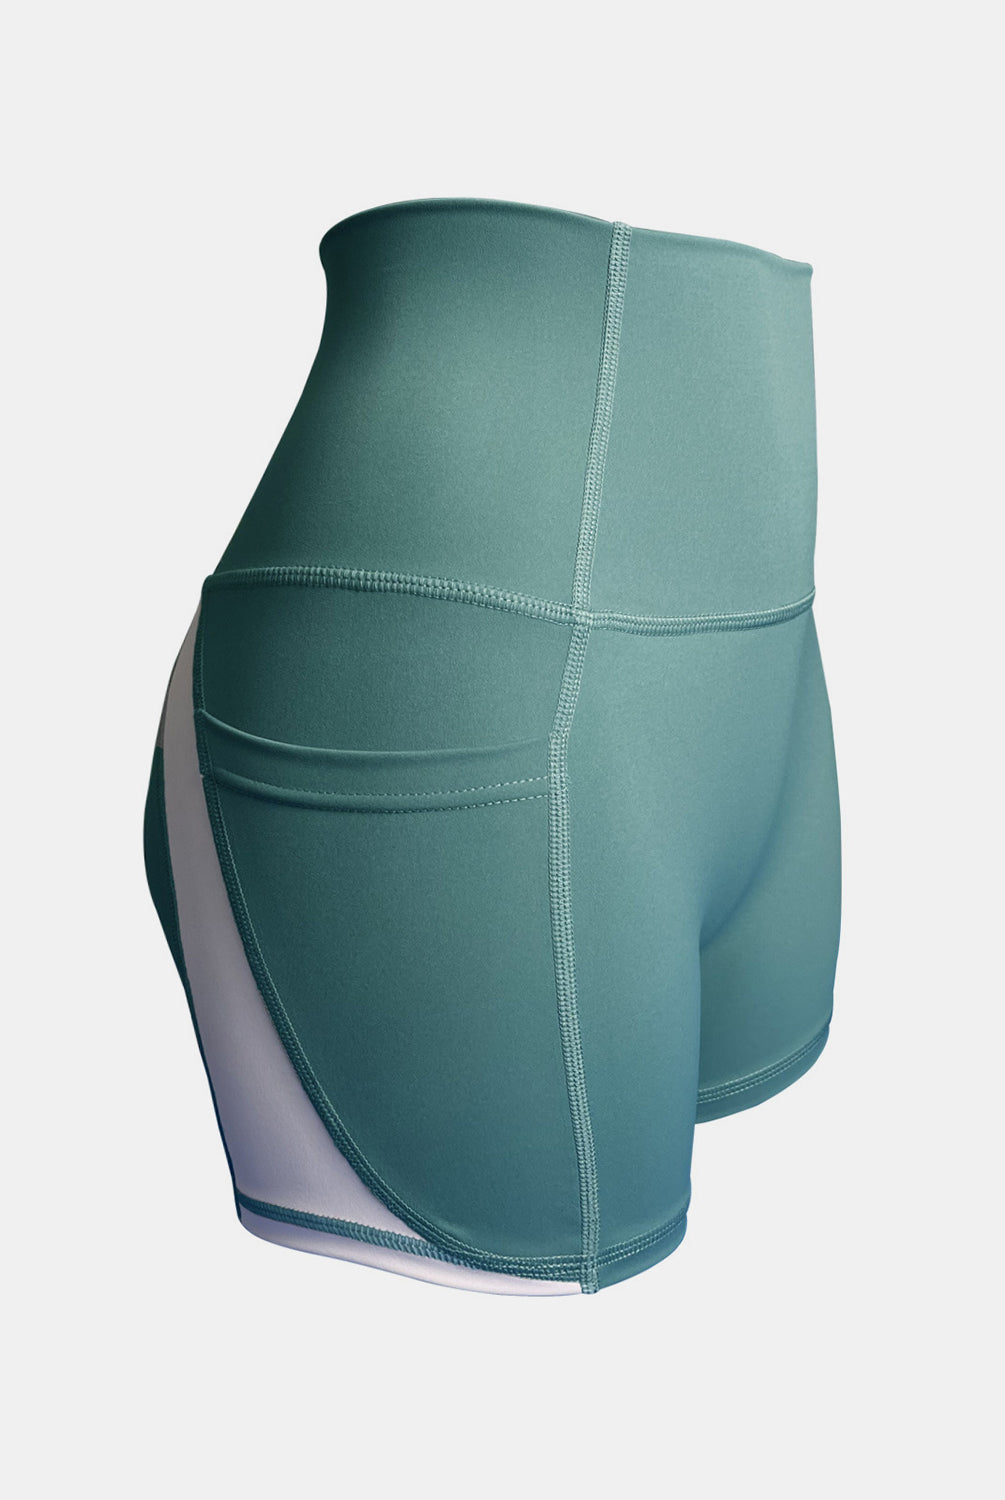 Athlete in dynamic active shorts featuring a practical pocket, ready for a workout session.